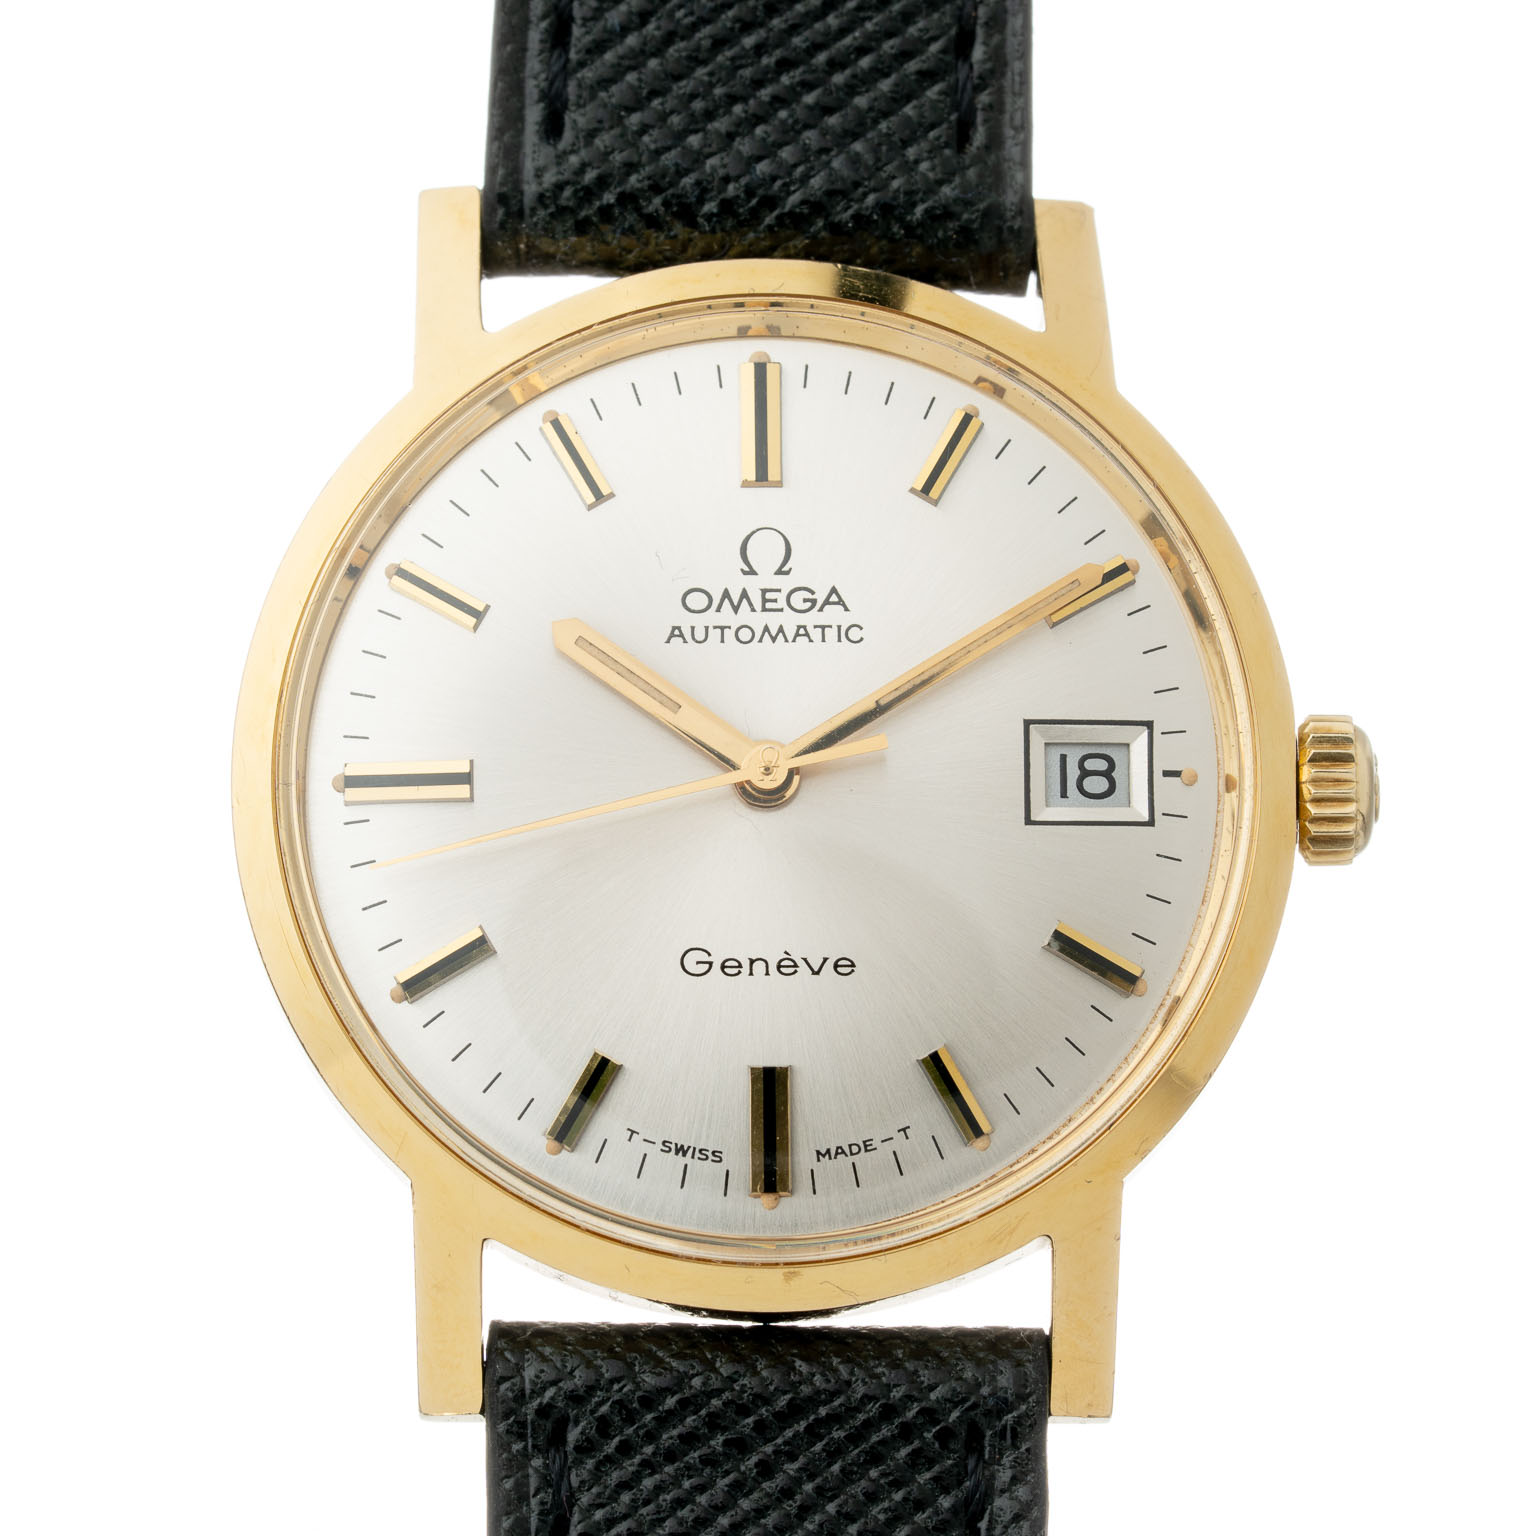 Vintage Omega Genève with White dial in gold with nice patina 166.070 from 1970s watch front